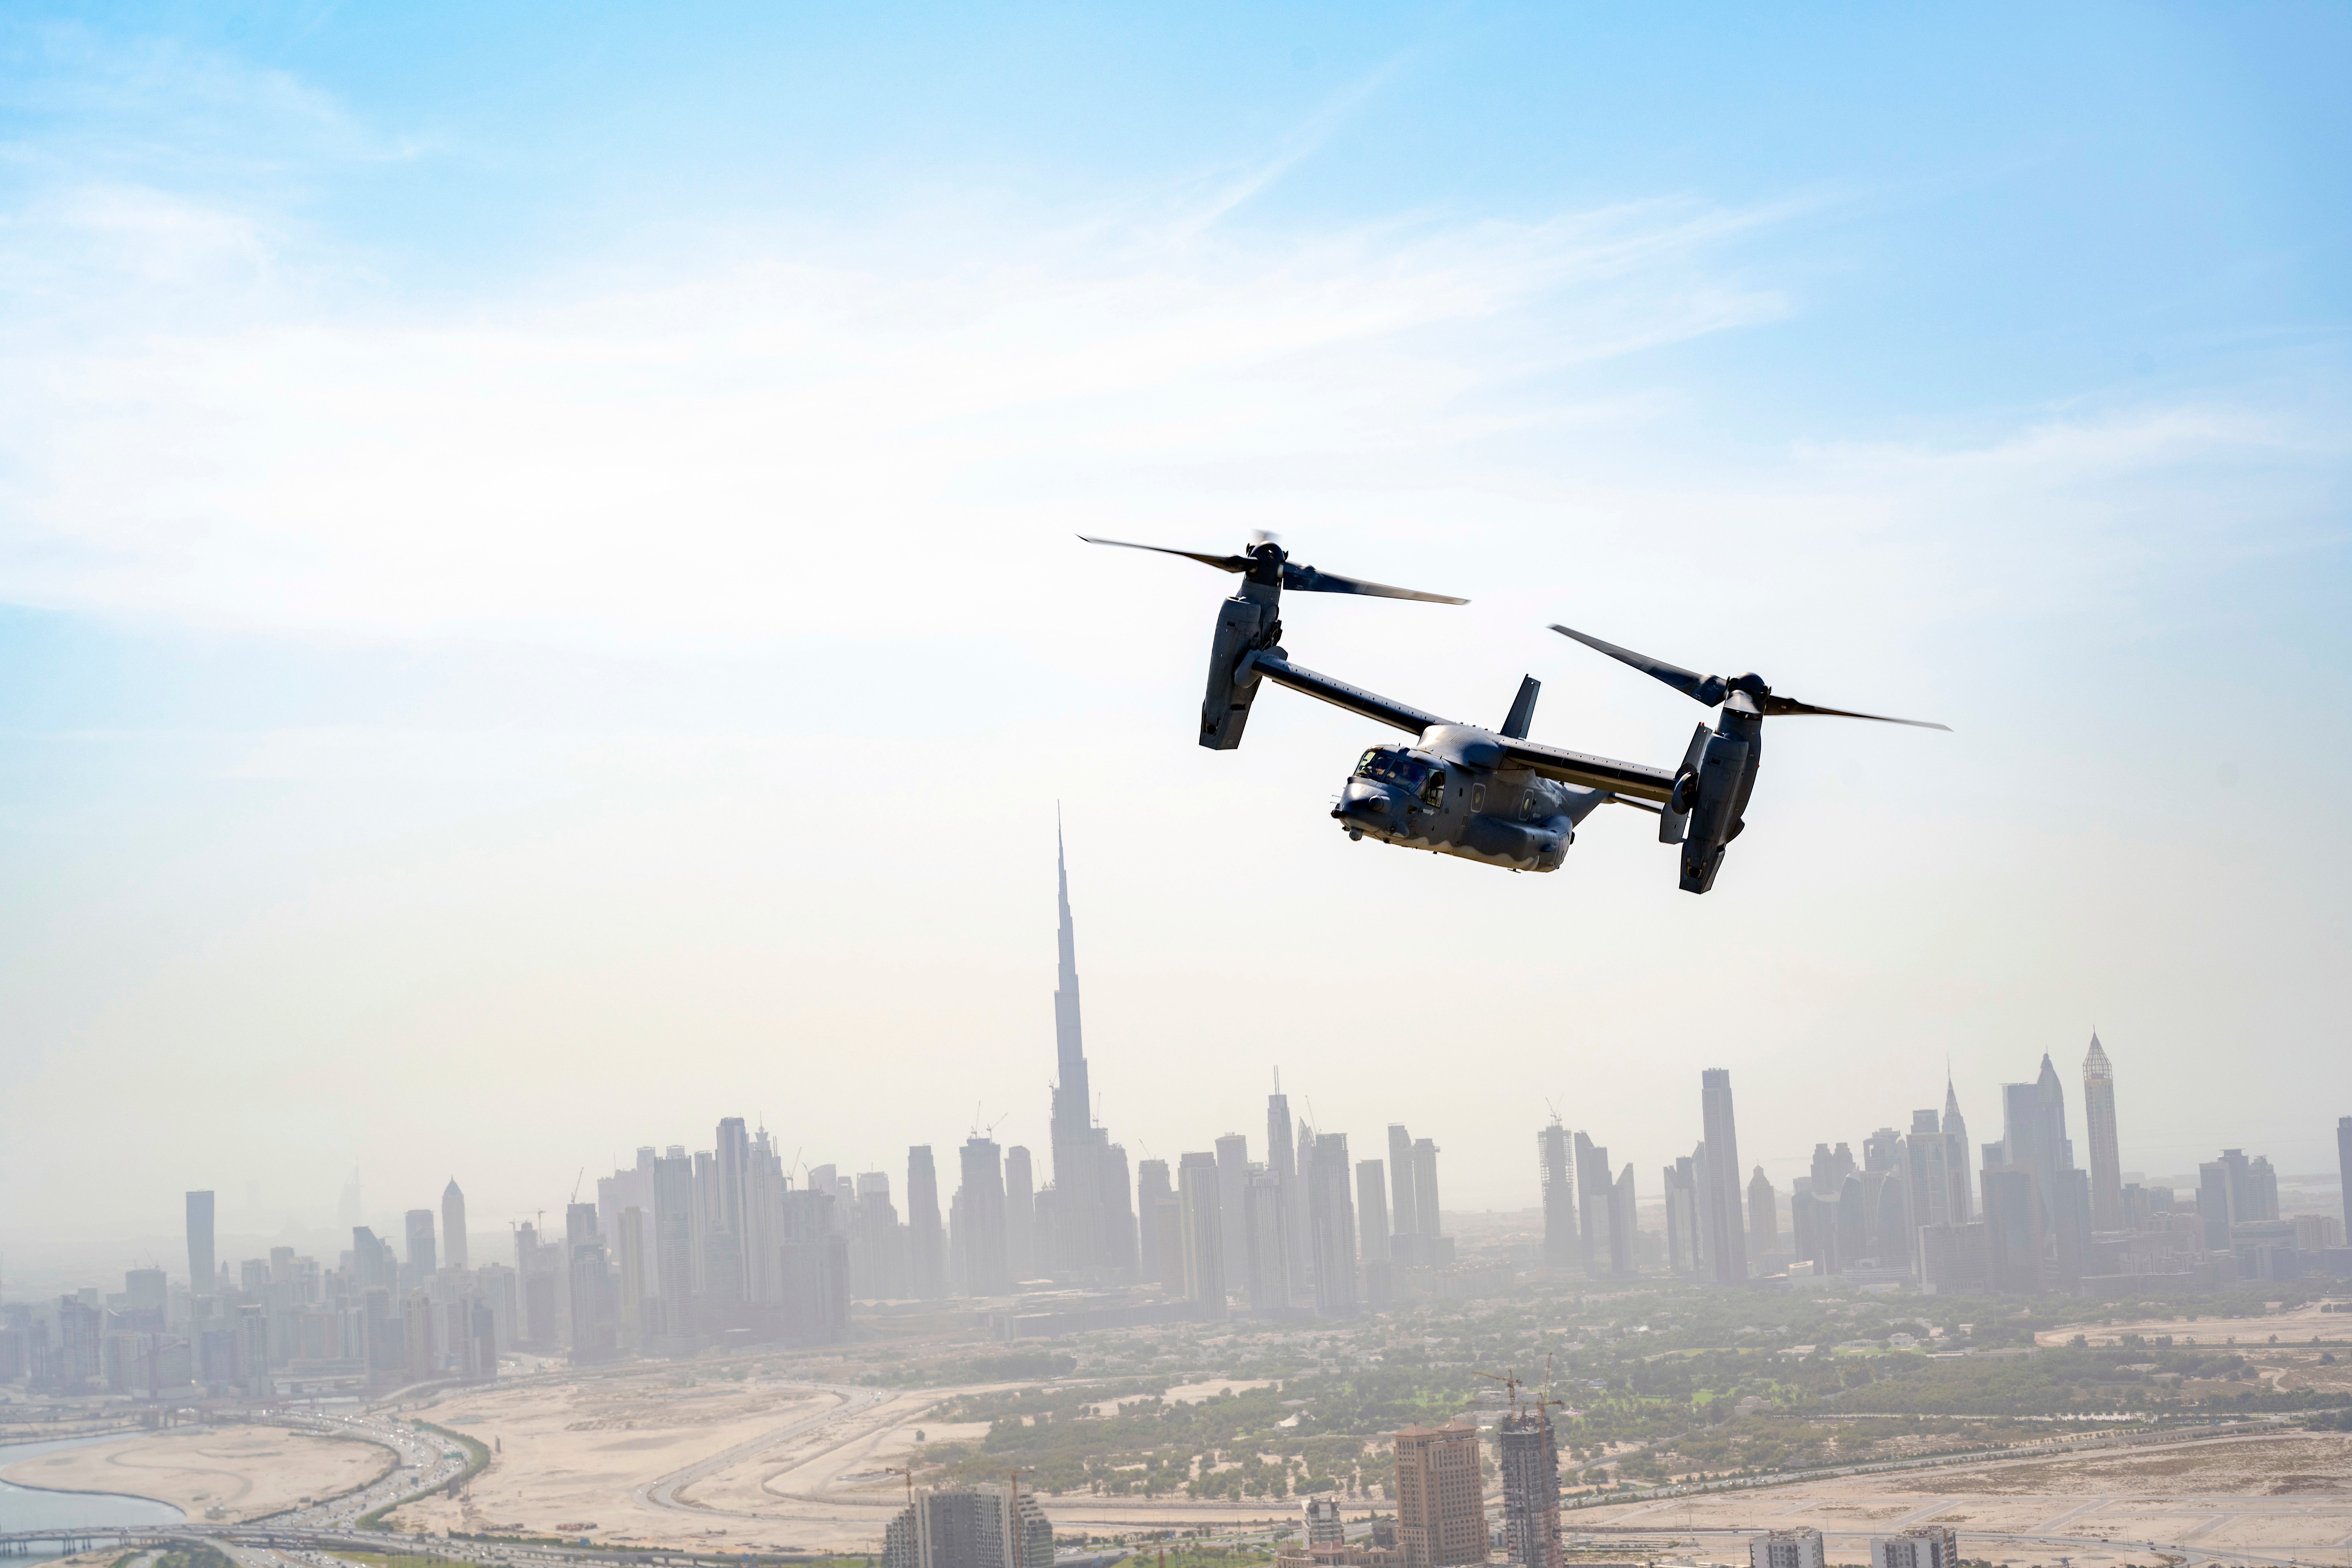 A U.S. Air Force CV-22 Osprey assigned to the 8th Expeditionary Special Operations Squadron, takes part in a photo chase mission around Dubai, United Arab Emirates, Sept 16, 2021. The mission of the CV-22 is to conduct long-range infiltration, exfiltration and resupply missions for special operations forces.  The CV-22 Osprey is a tiltrotor aircraft that combines the vertical takeoff, hover, and vertical landing qualities of a helicopter with the long-range, fuel efficiency, and speed characteristics of a turboprop aircraft.  (U.S. Air Force photo by Master Sgt. Wolfram M. Stumpf)